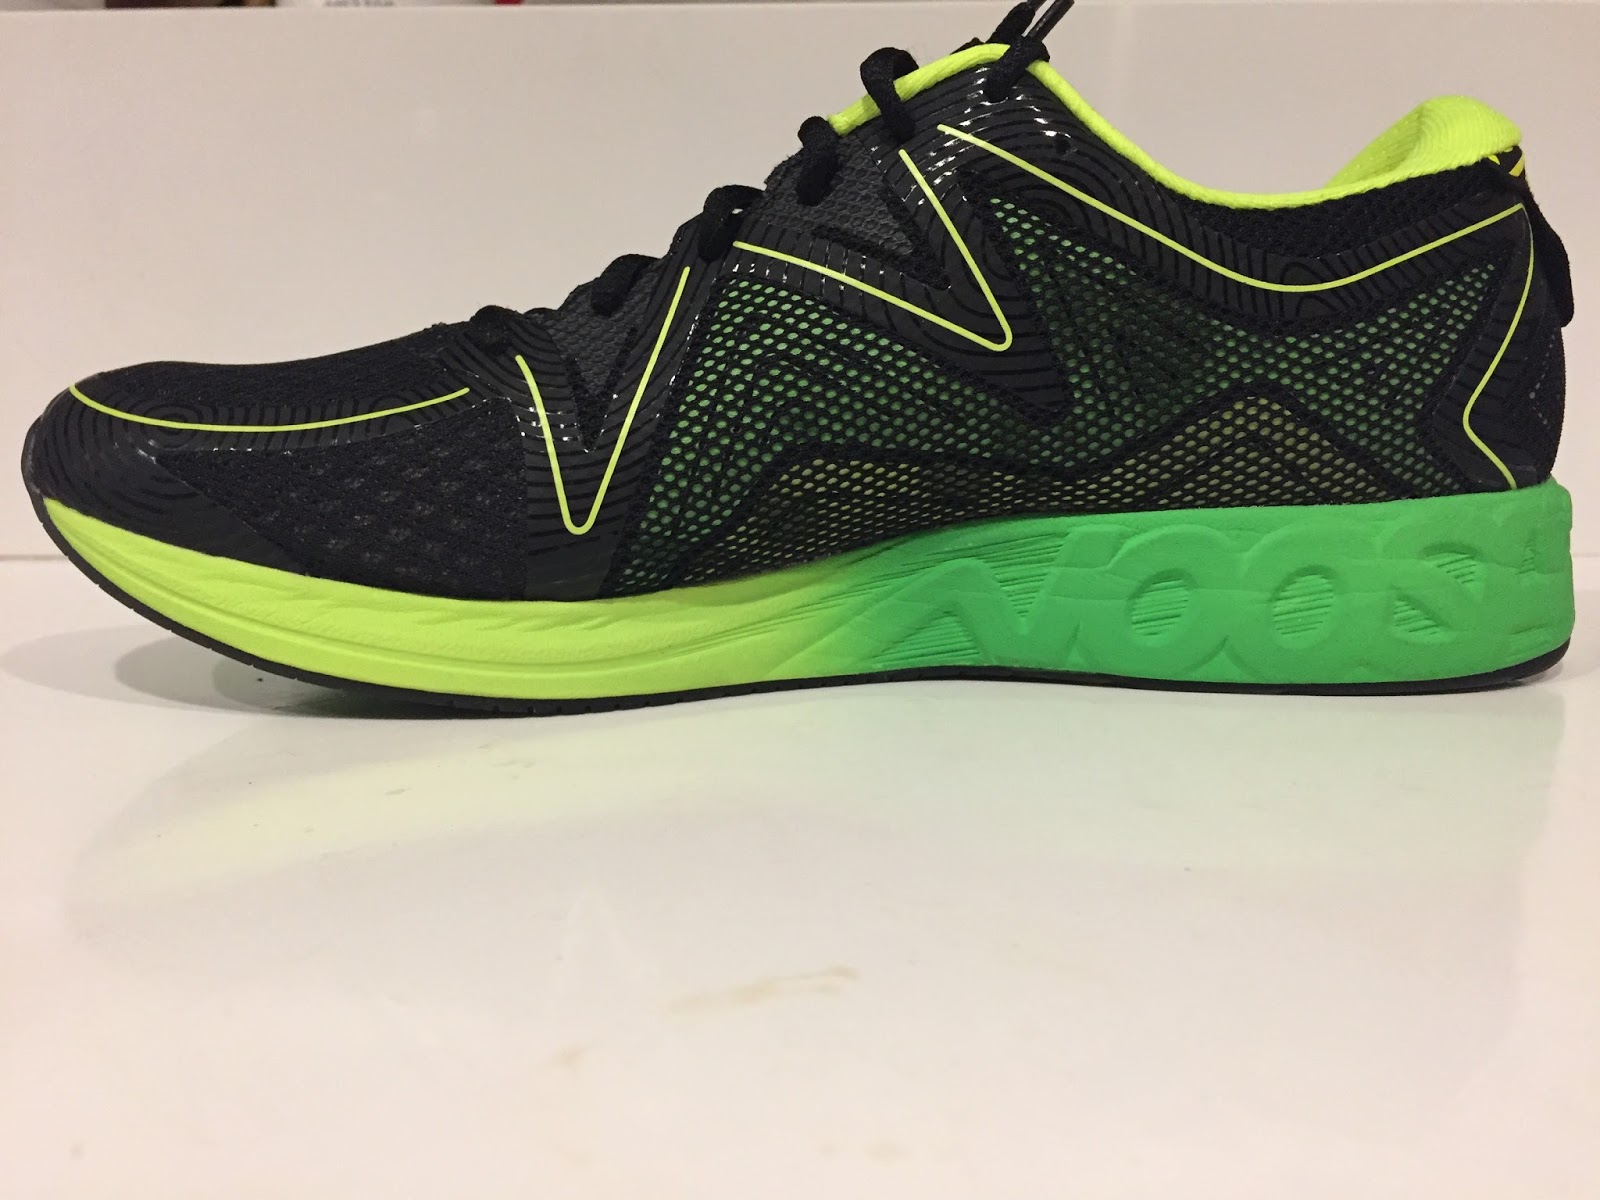 Road Trail Run: ASICS Noosa FF Review-The Firm. Asics Revamps the 